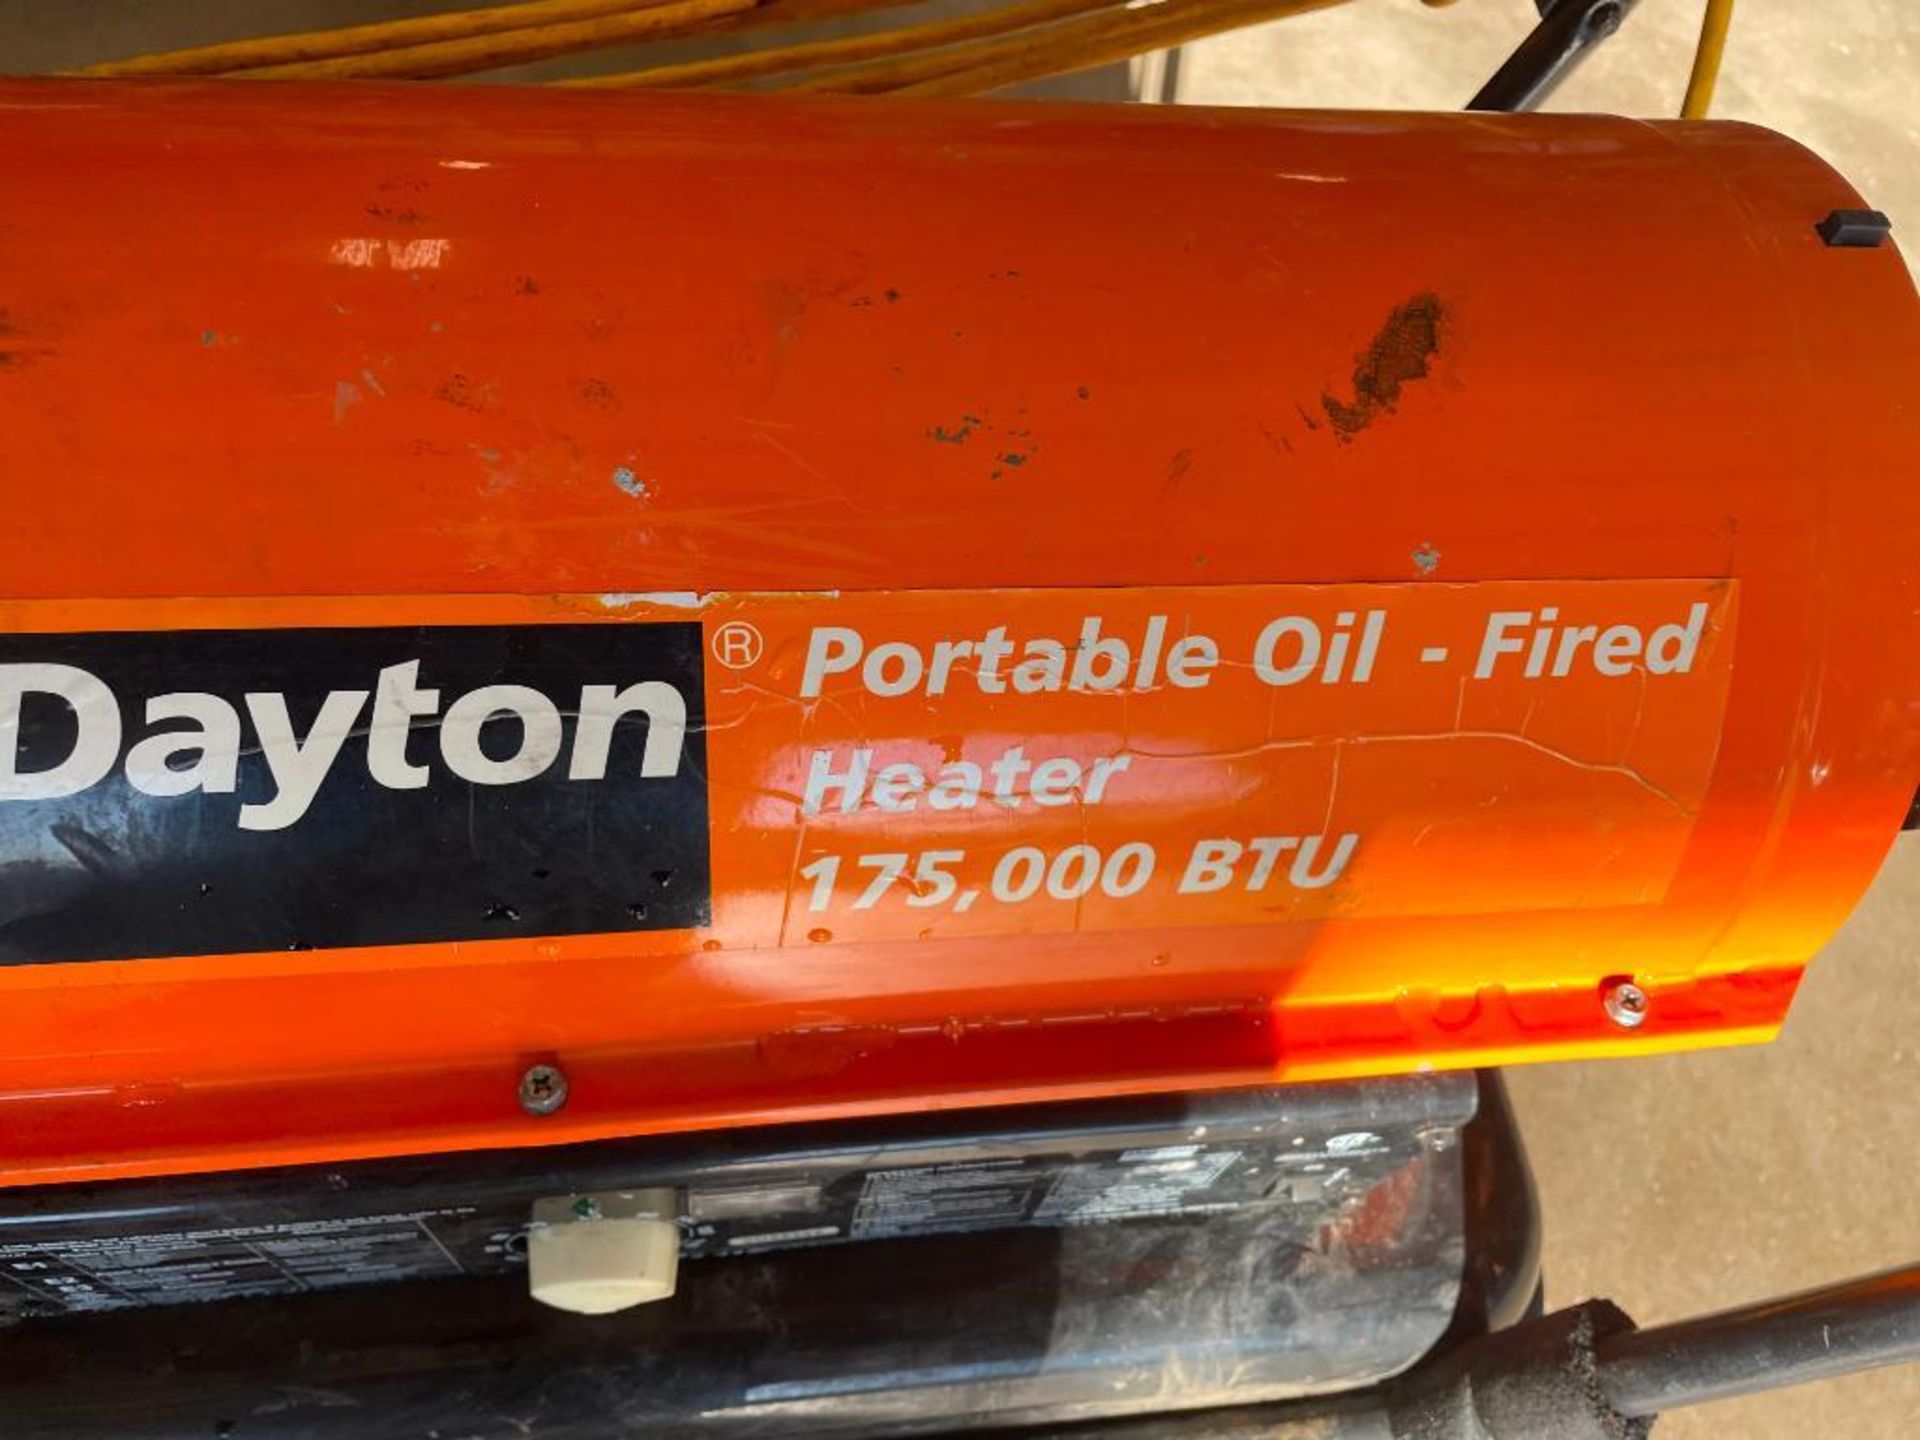 Dayton Portable Oil-Fired Heater. Located in Hazelwood, MO. - Image 7 of 7